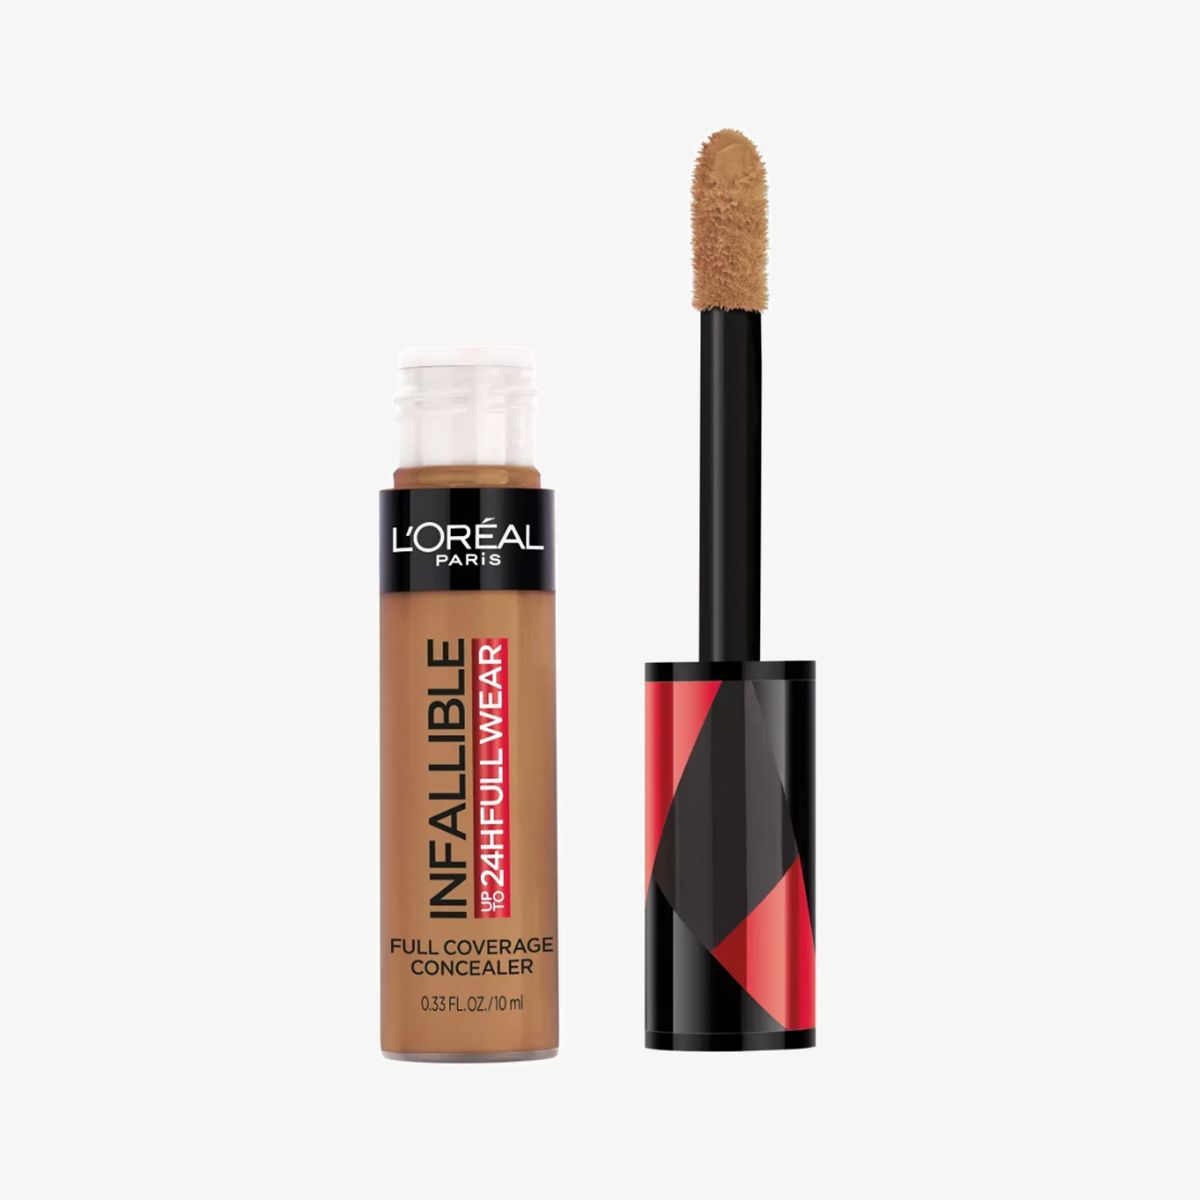 L'Oréal Paris Infallible Full Wear Concealer up to 24H Full Coverage